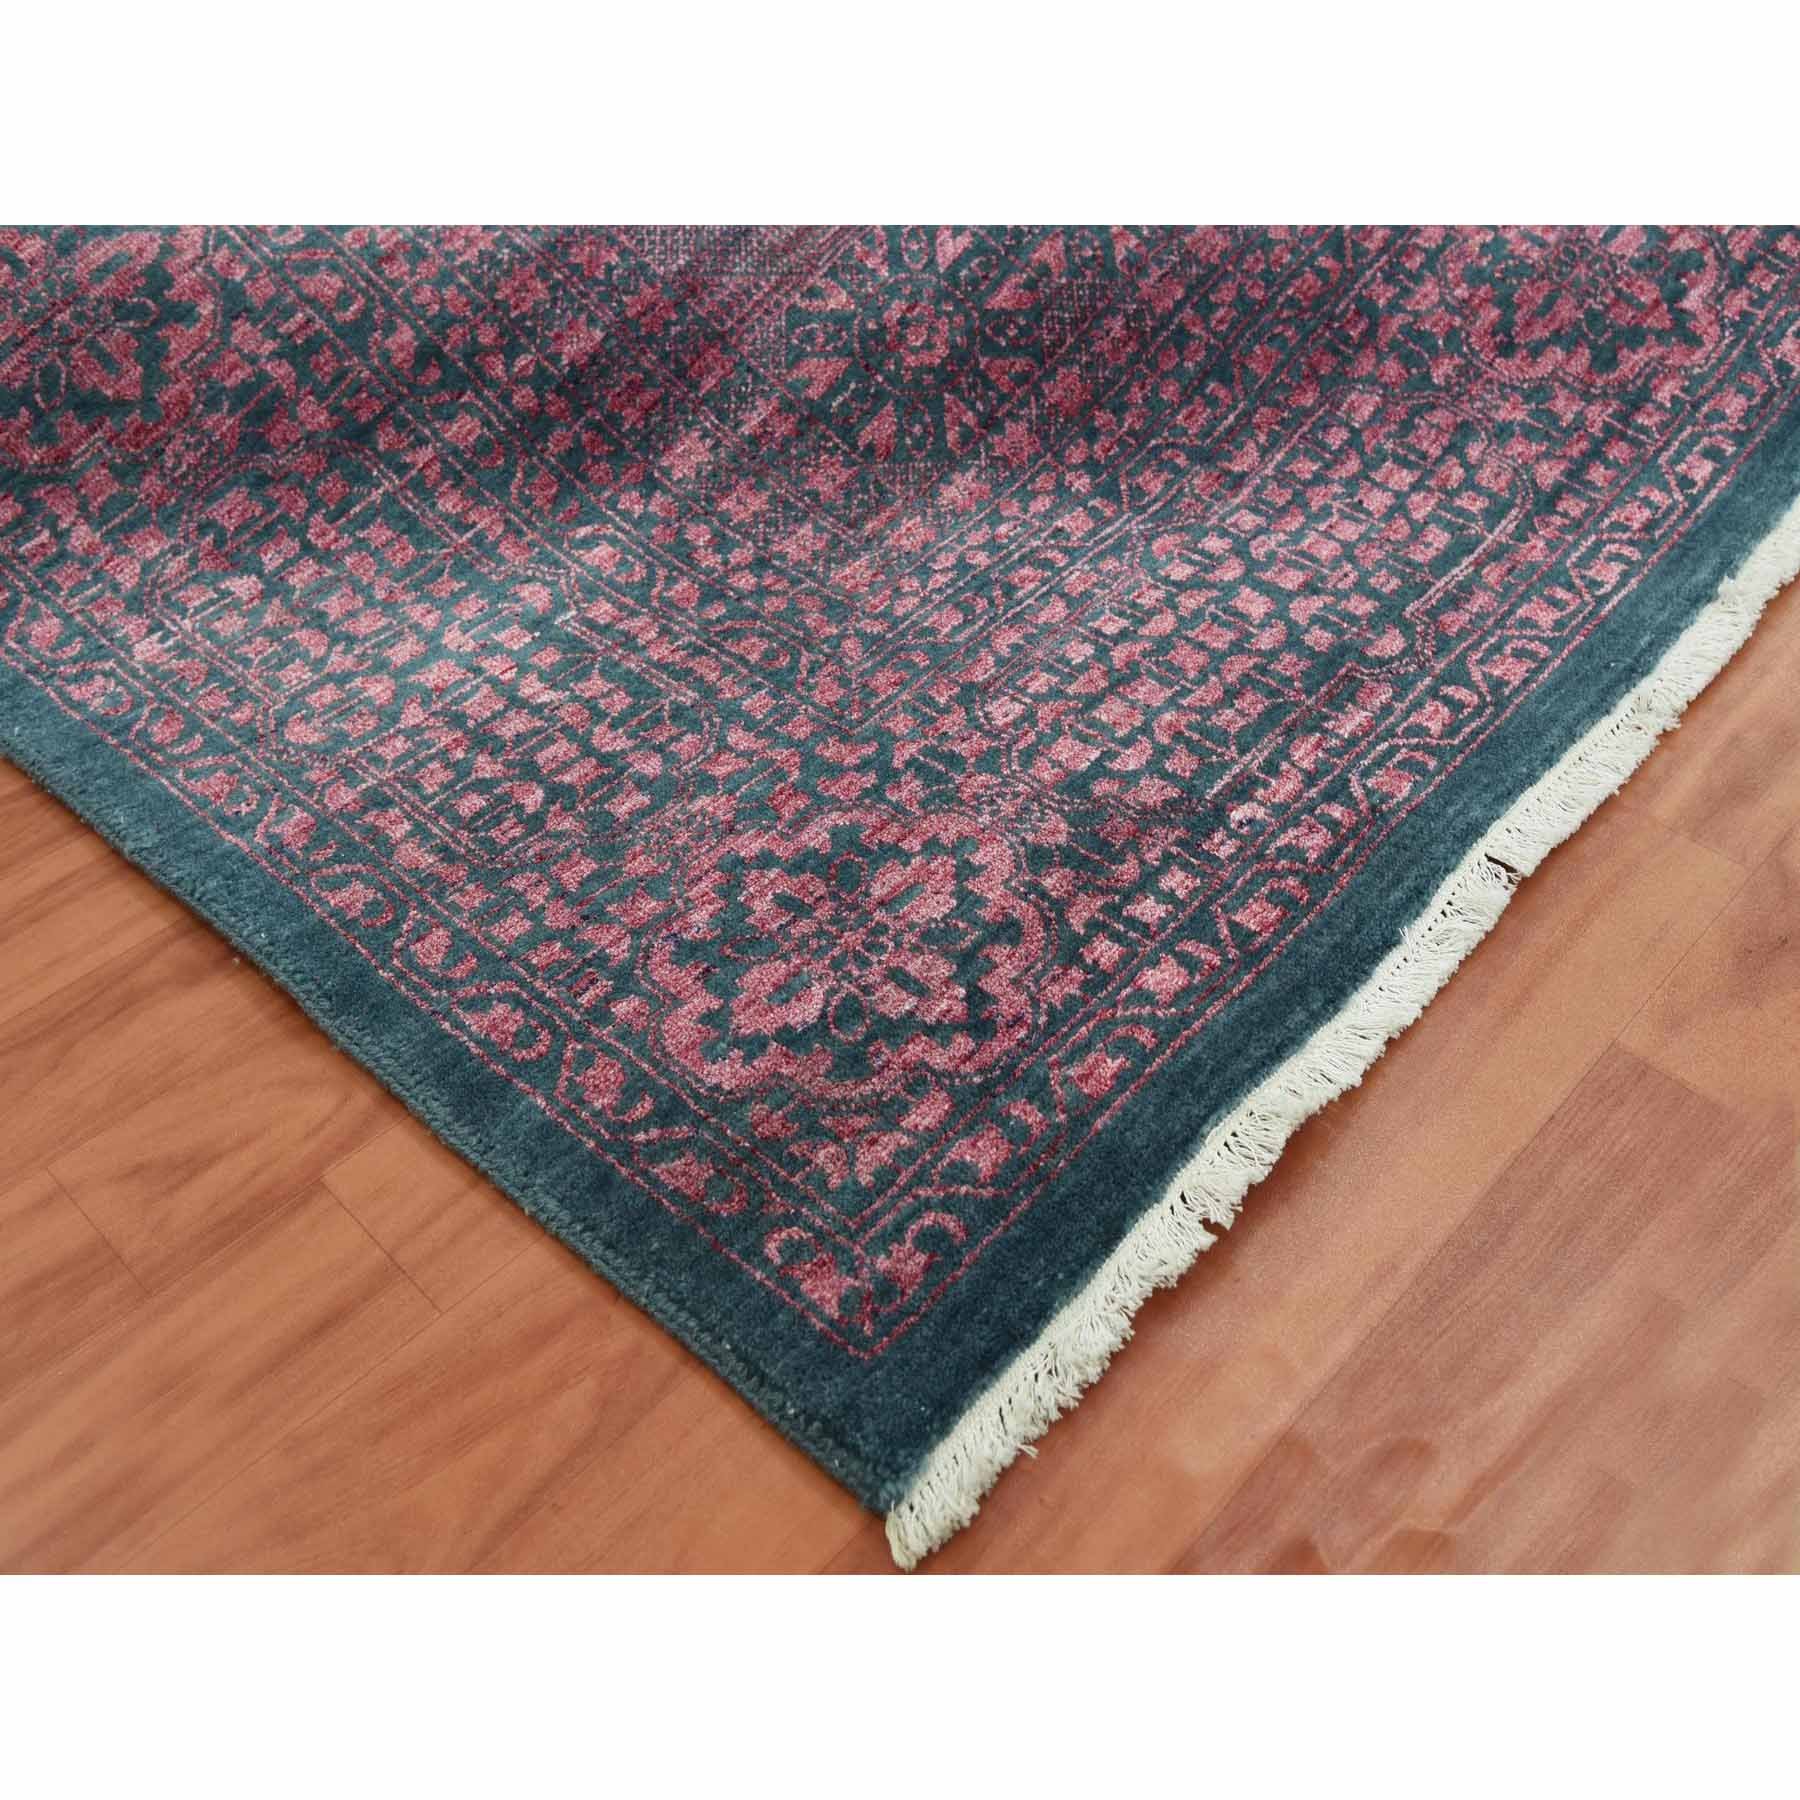 8'x9'9" Dark Green with Pop of Red, Obscured, Tone on Tone Mamluk Design, Wool and Silk Hand Woven, Oriental Rug 